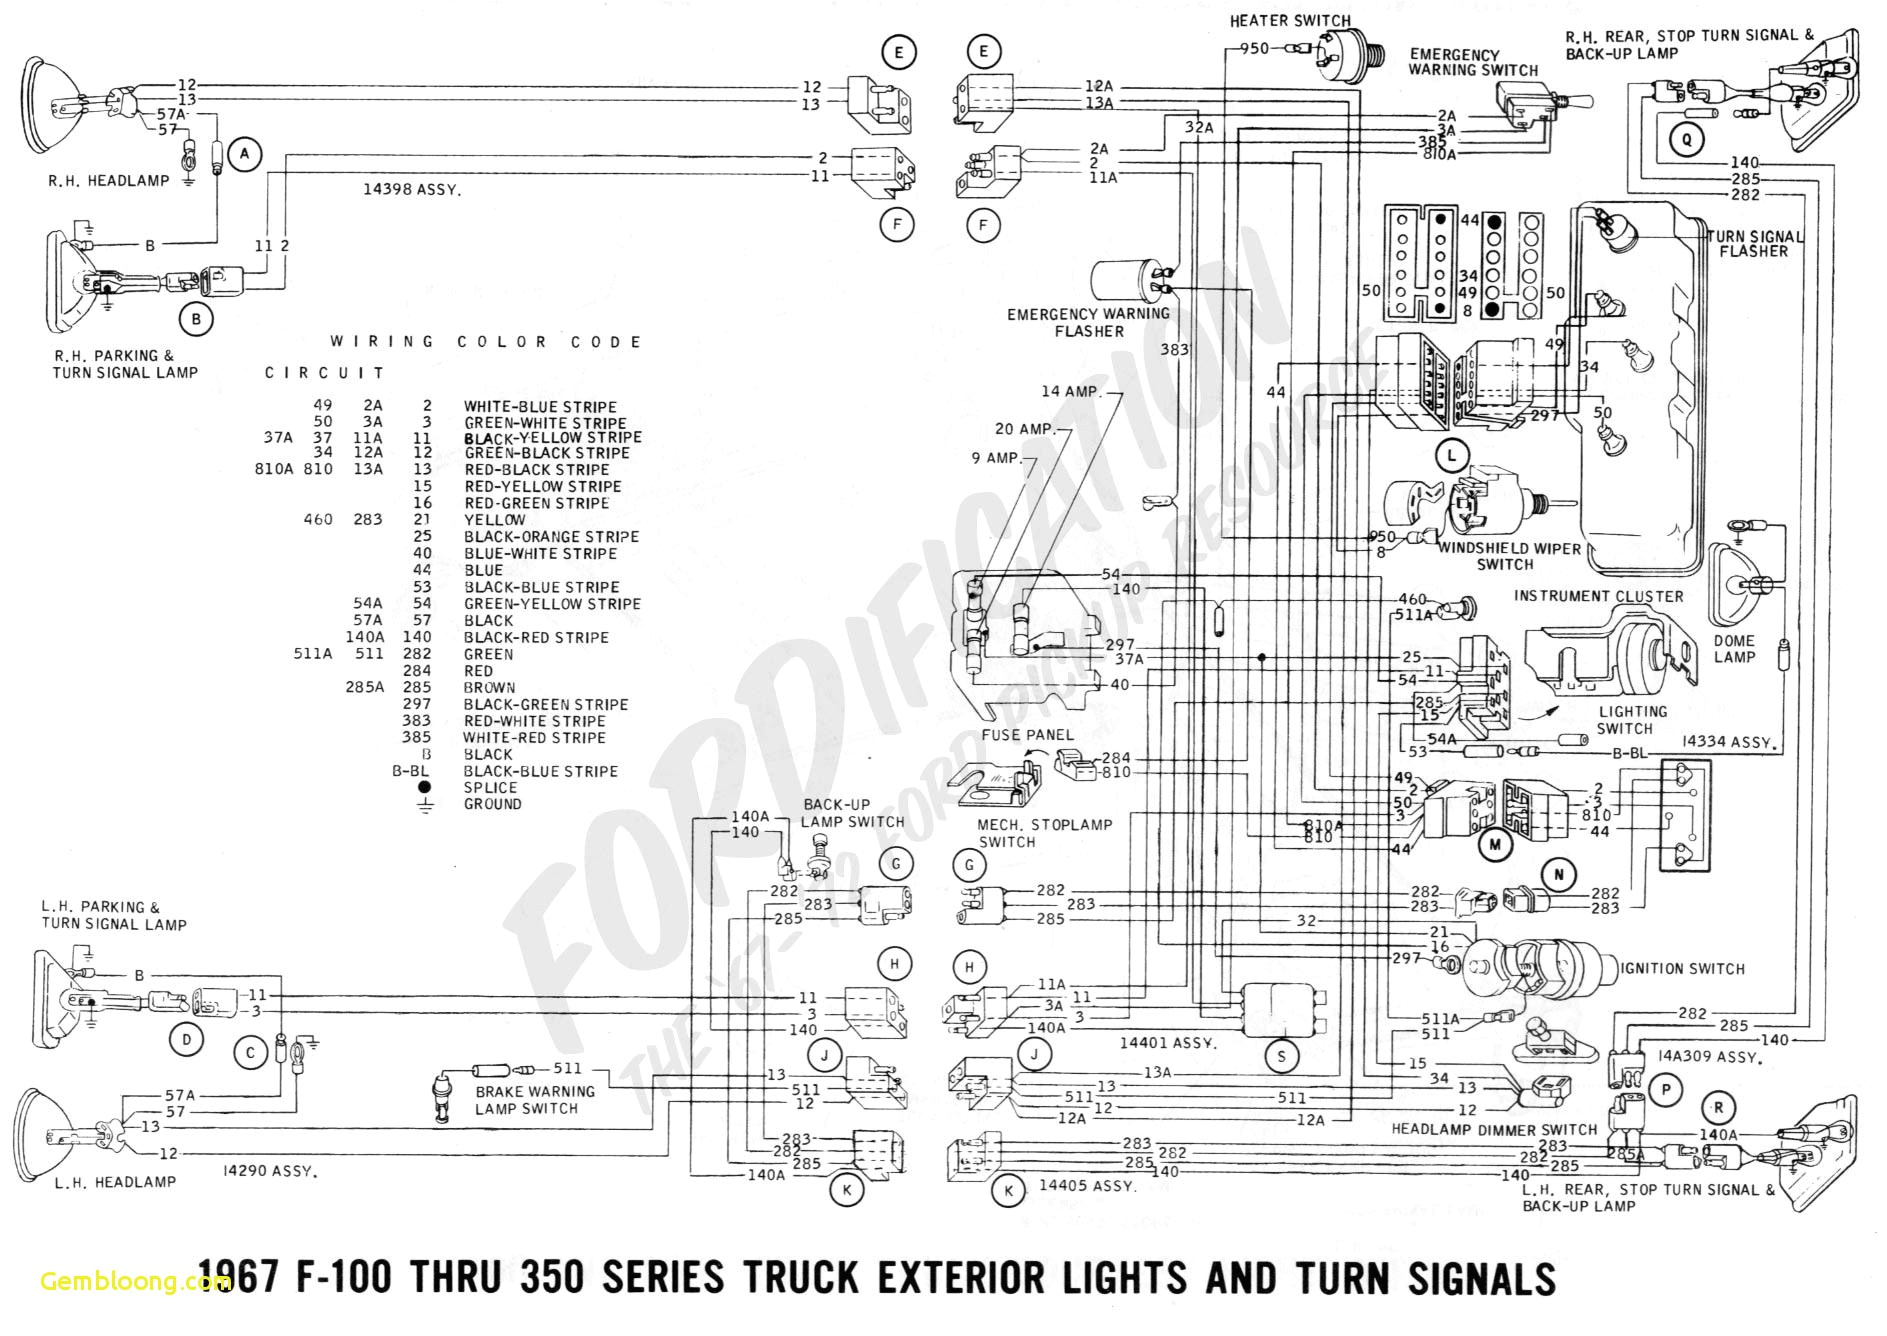 download ford trucks wiring diagrams ford f150 wiring